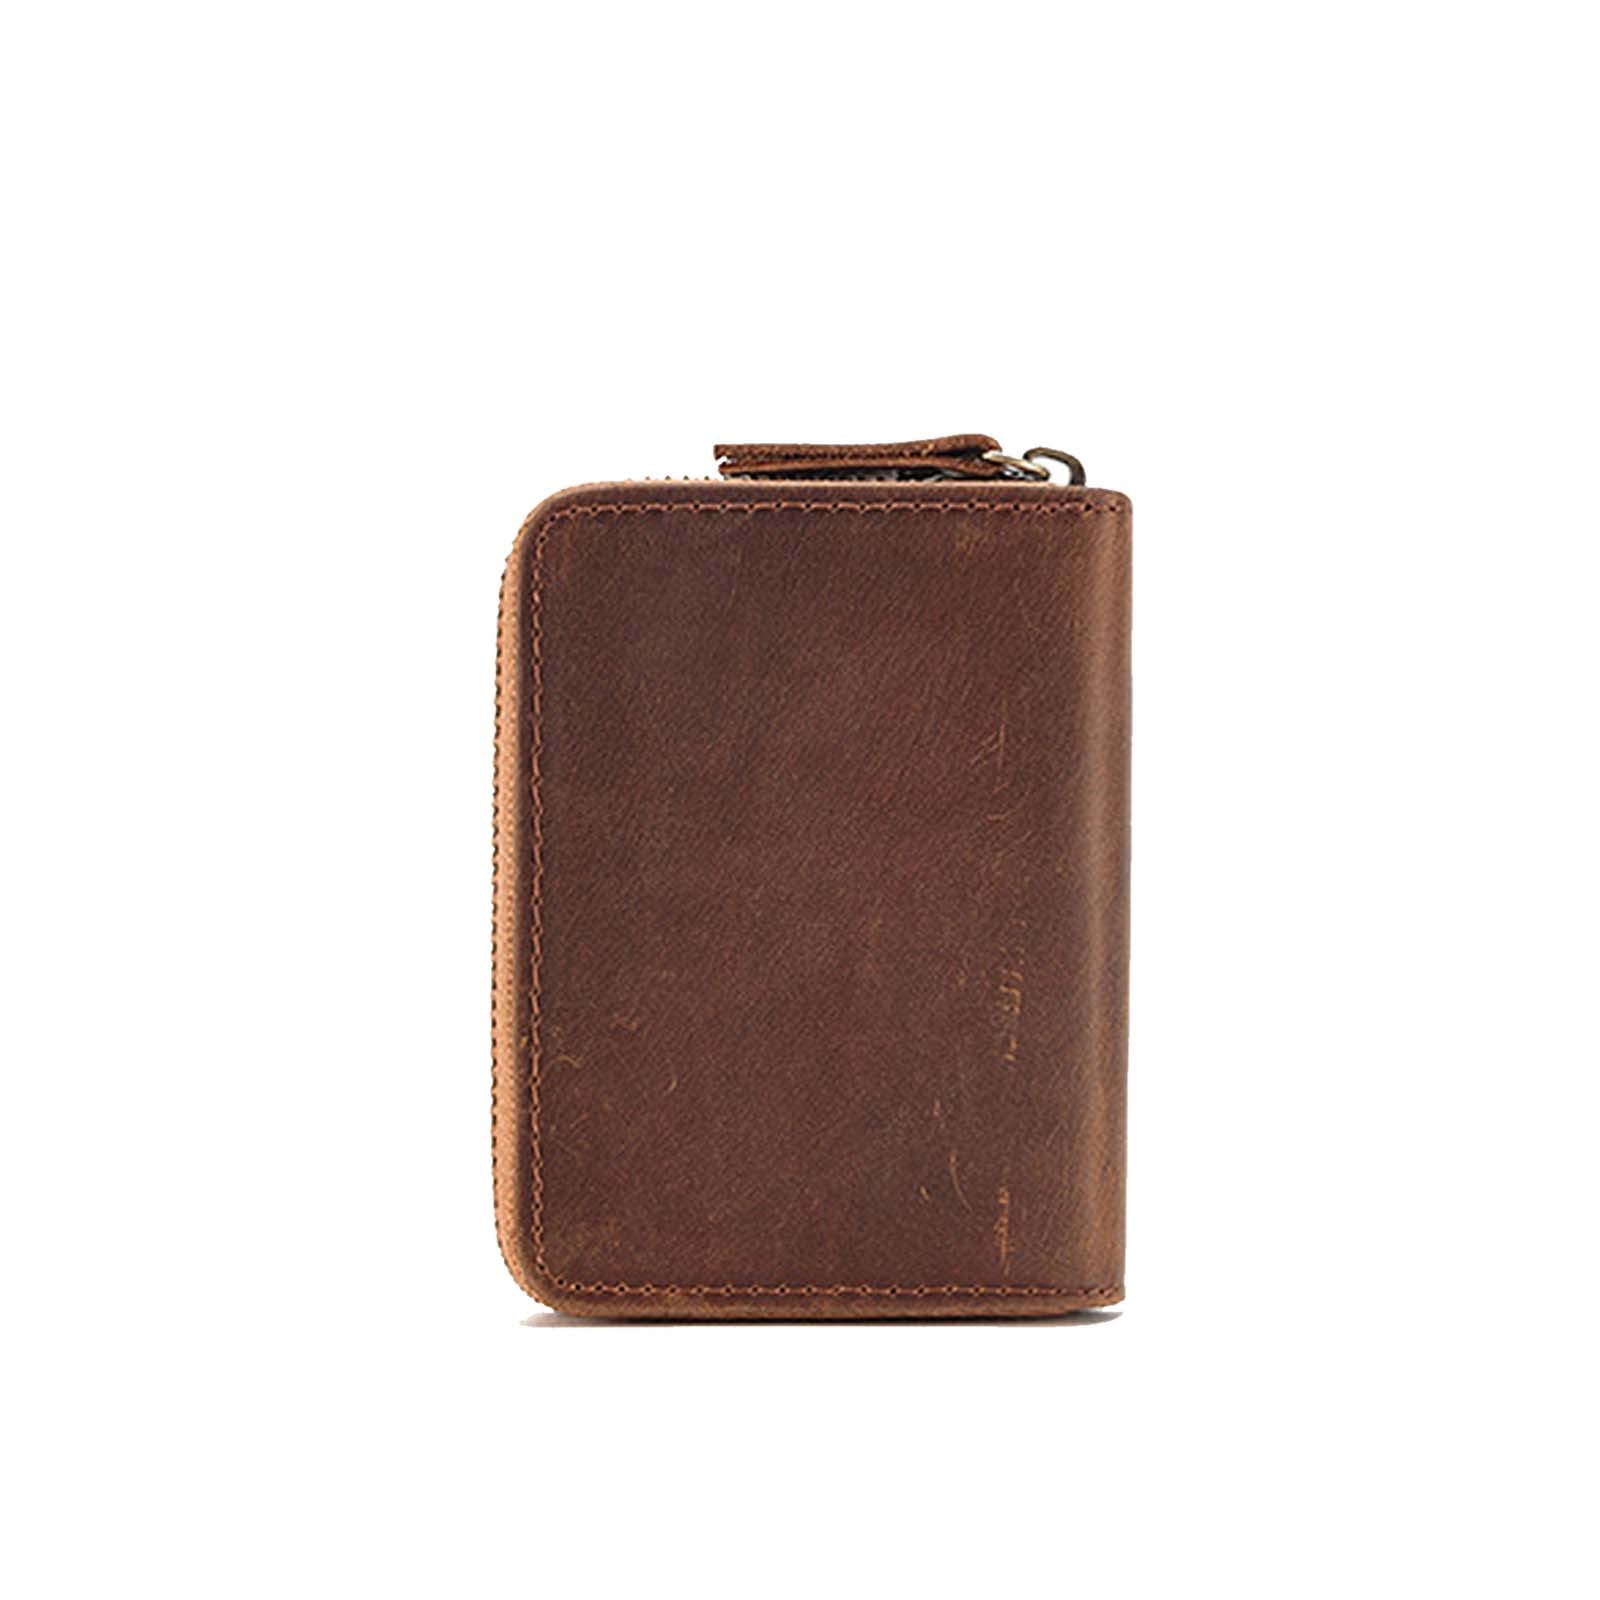 Leather Card Holder Wallet with Zipper